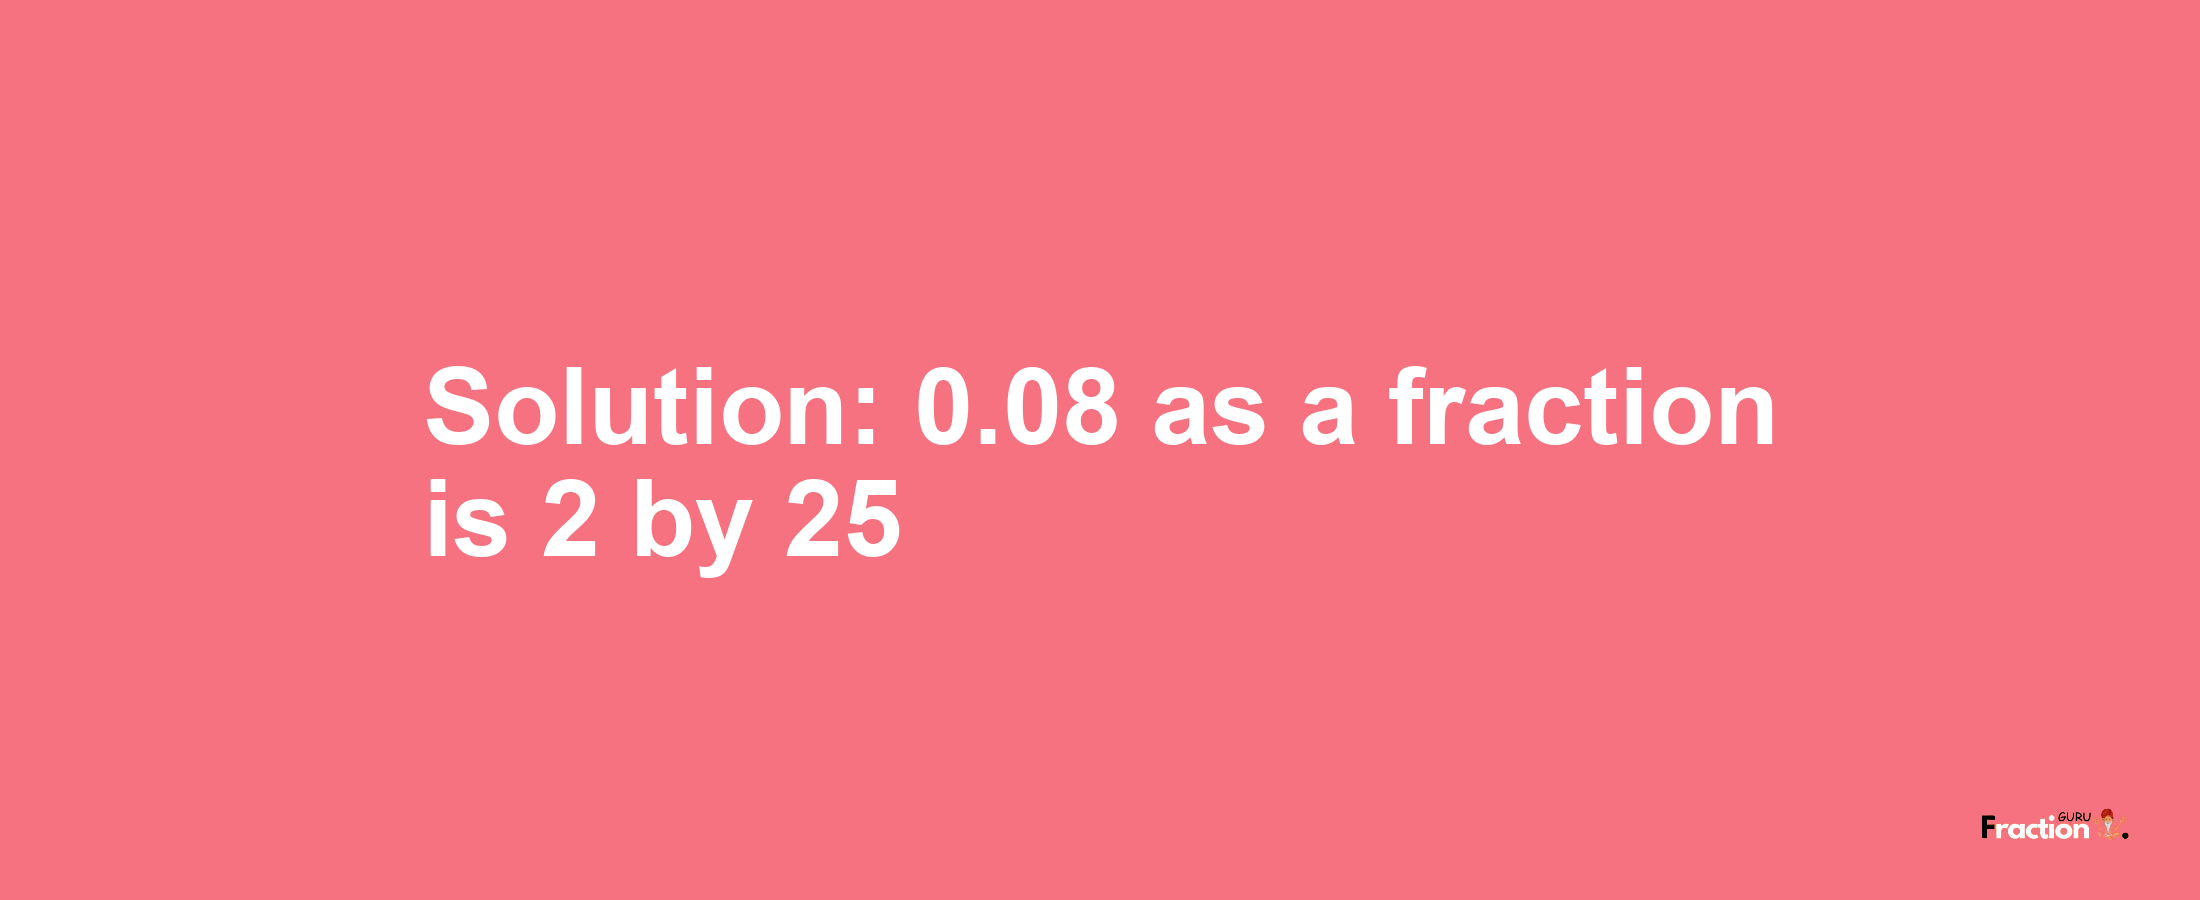 Solution:0.08 as a fraction is 2/25